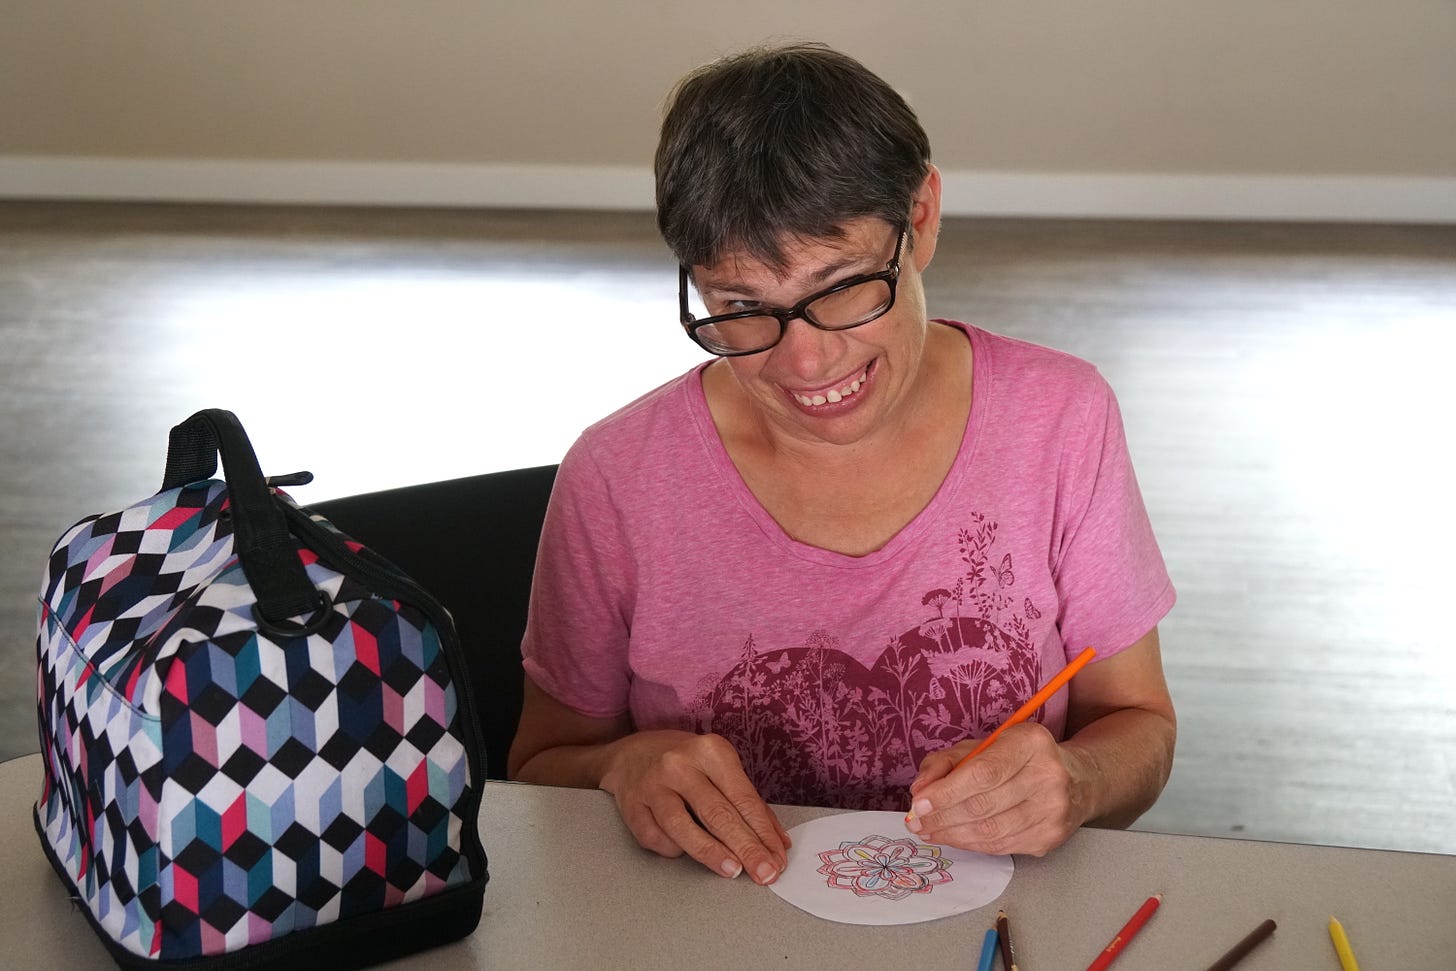 A woman with short dark hair wearing a pink t-shirt, smiles as she looks over the dark frames of her glasses. She holds an orange pencil in her left hand and is coloring a mandala which she holds on the table with her other hand.